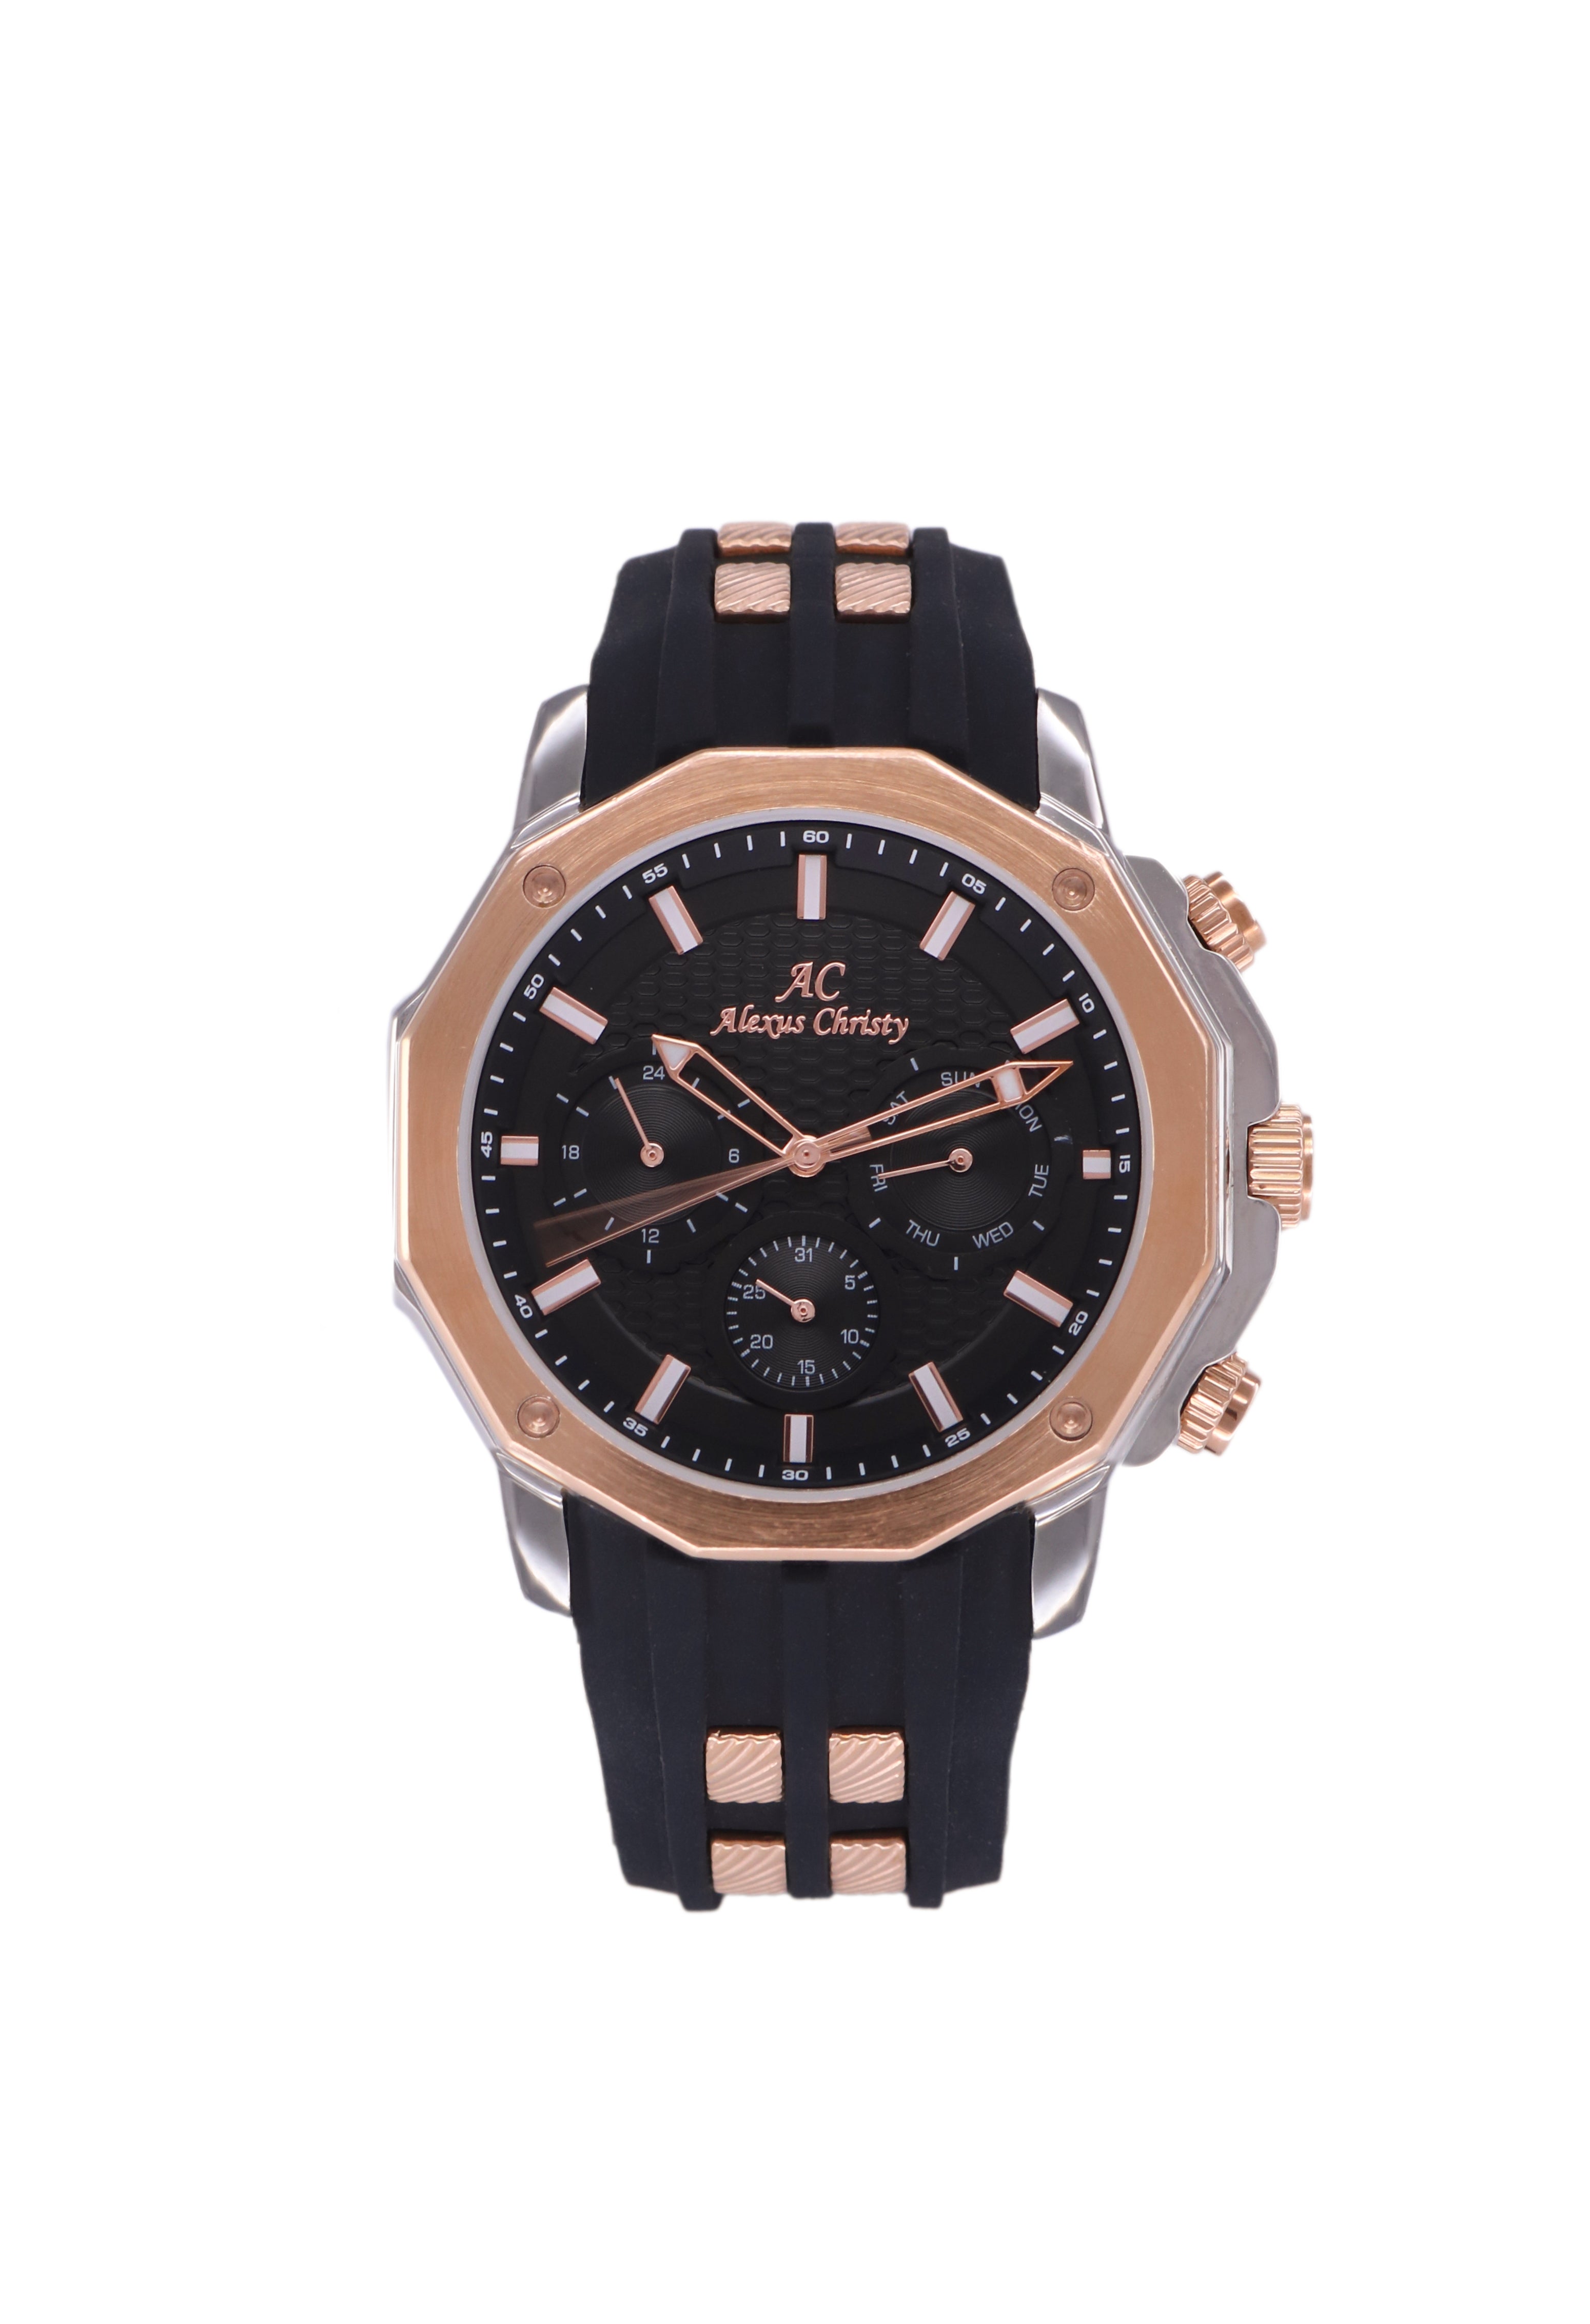 Multifunctional Rubber Band Day/Date Analog Sporty Men Watch